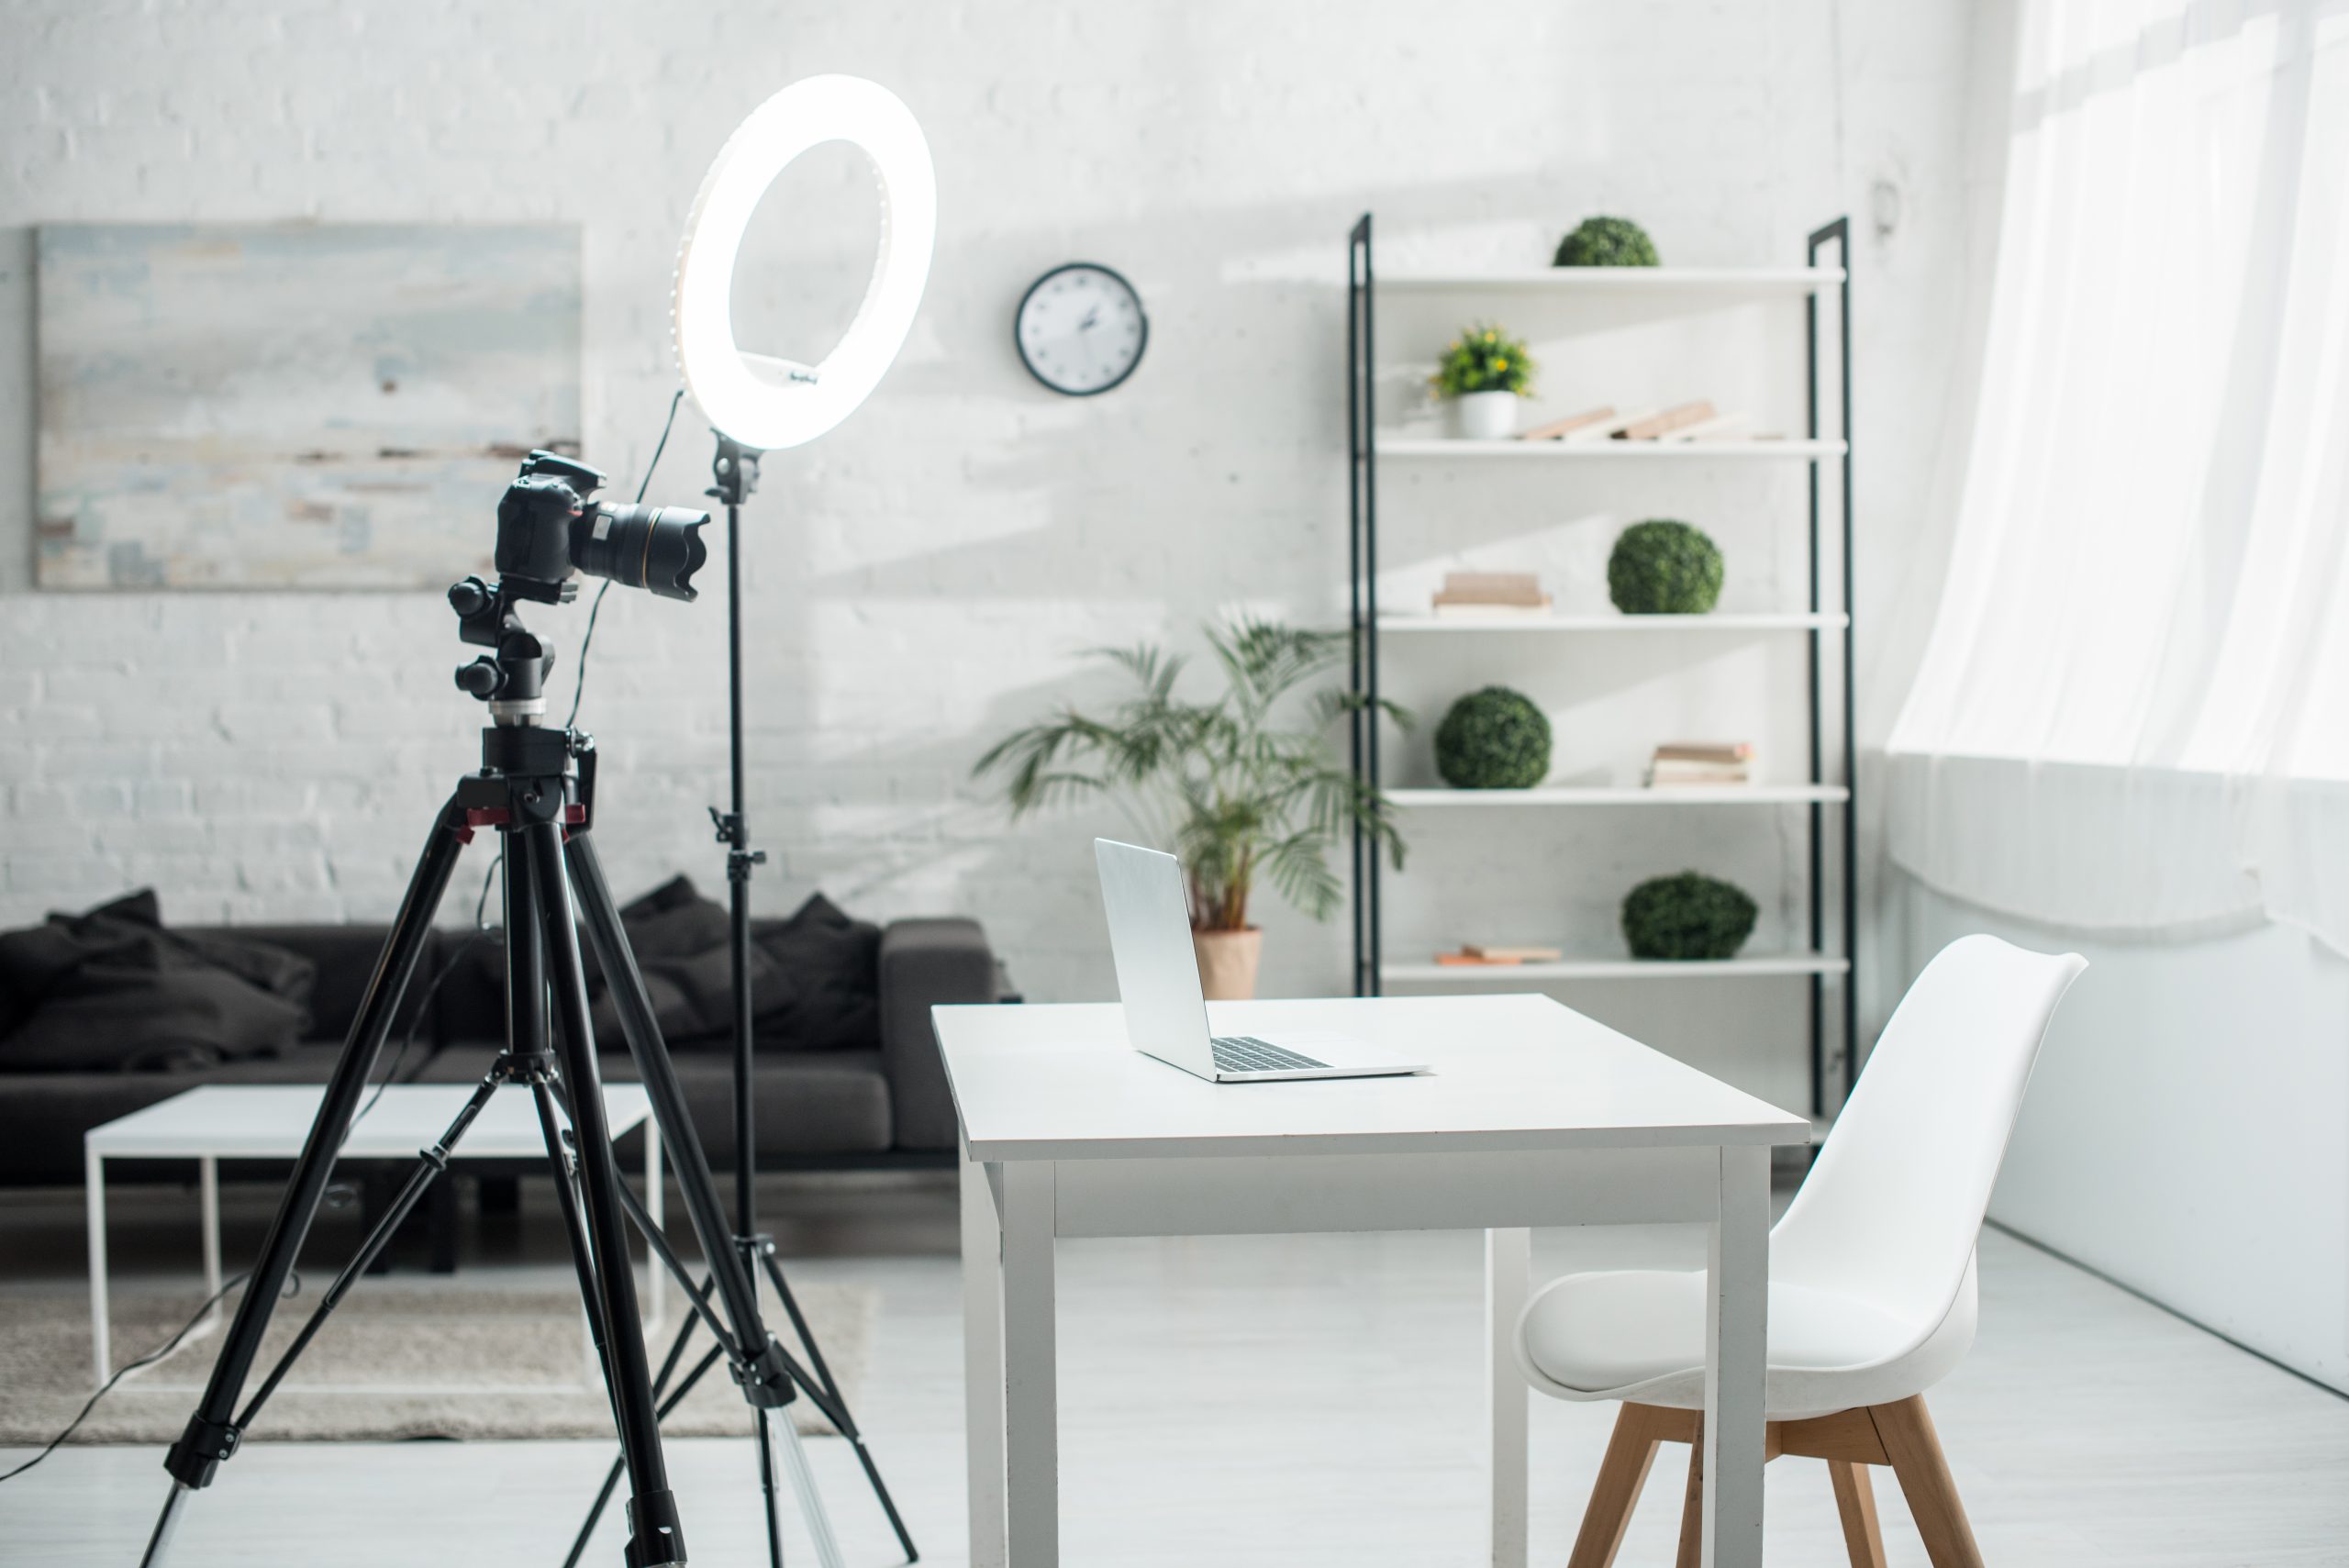 Best Neewer Ring Light for you? Top 7 Neewer Ring Lights Revealed